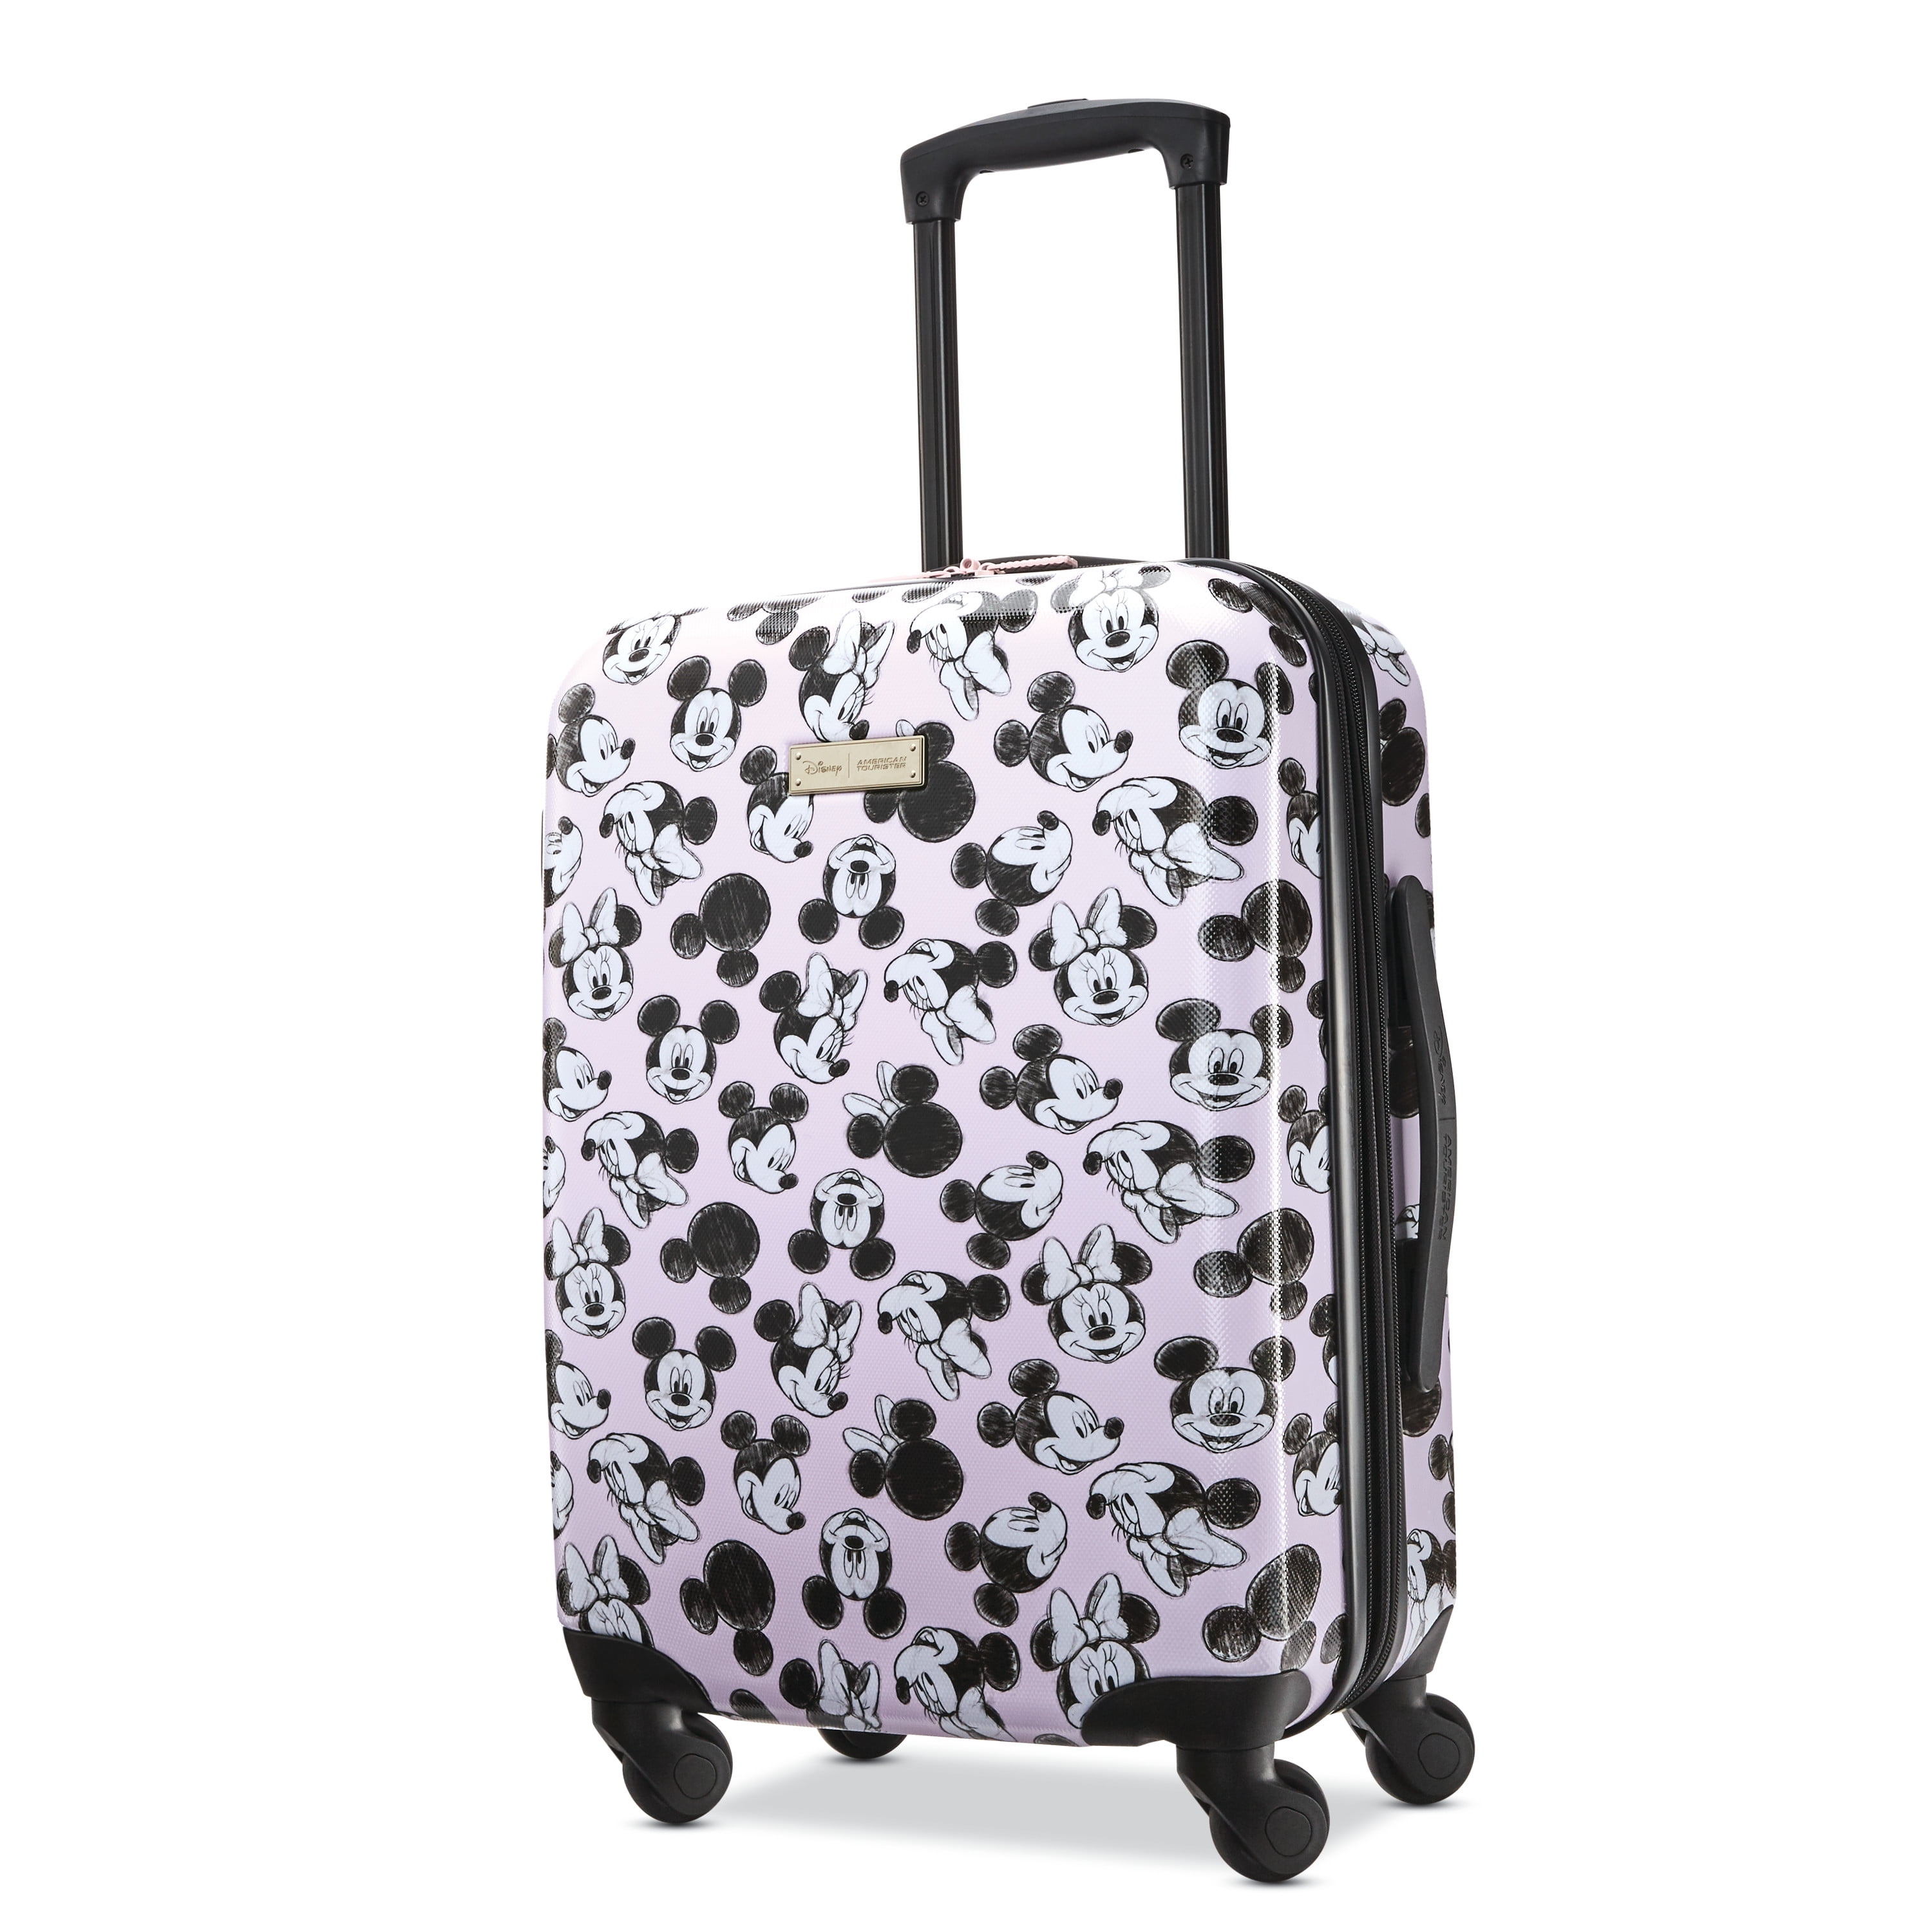 American Tourister Disney Hardside Luggage With Spinner Wheels Minnie Loves Mickey Carry On 21